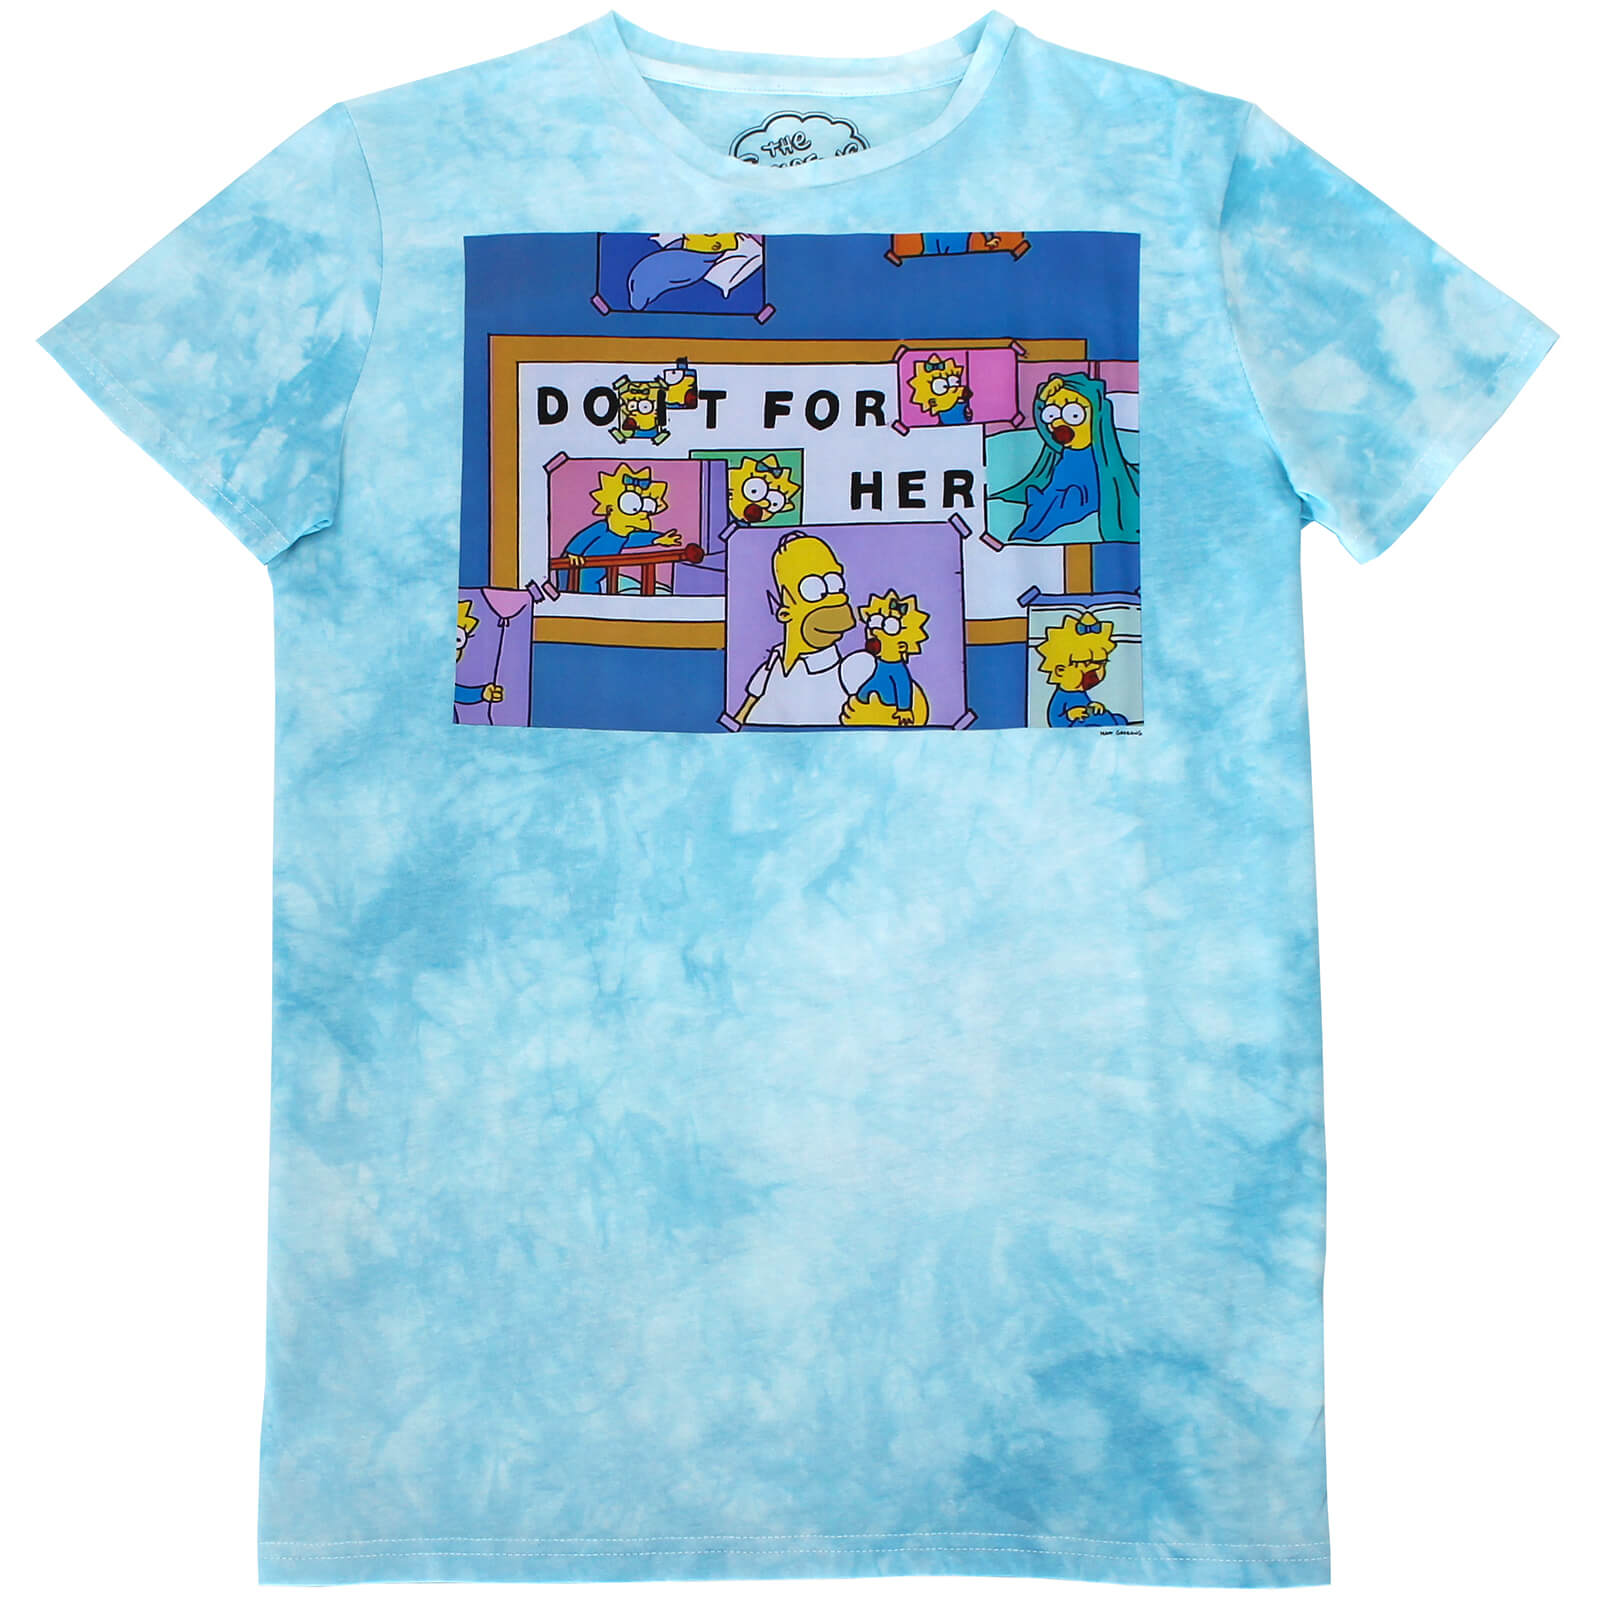 Cakeworthy x The Simpsons - Do It For Her Tie Dye T-Shirt - M